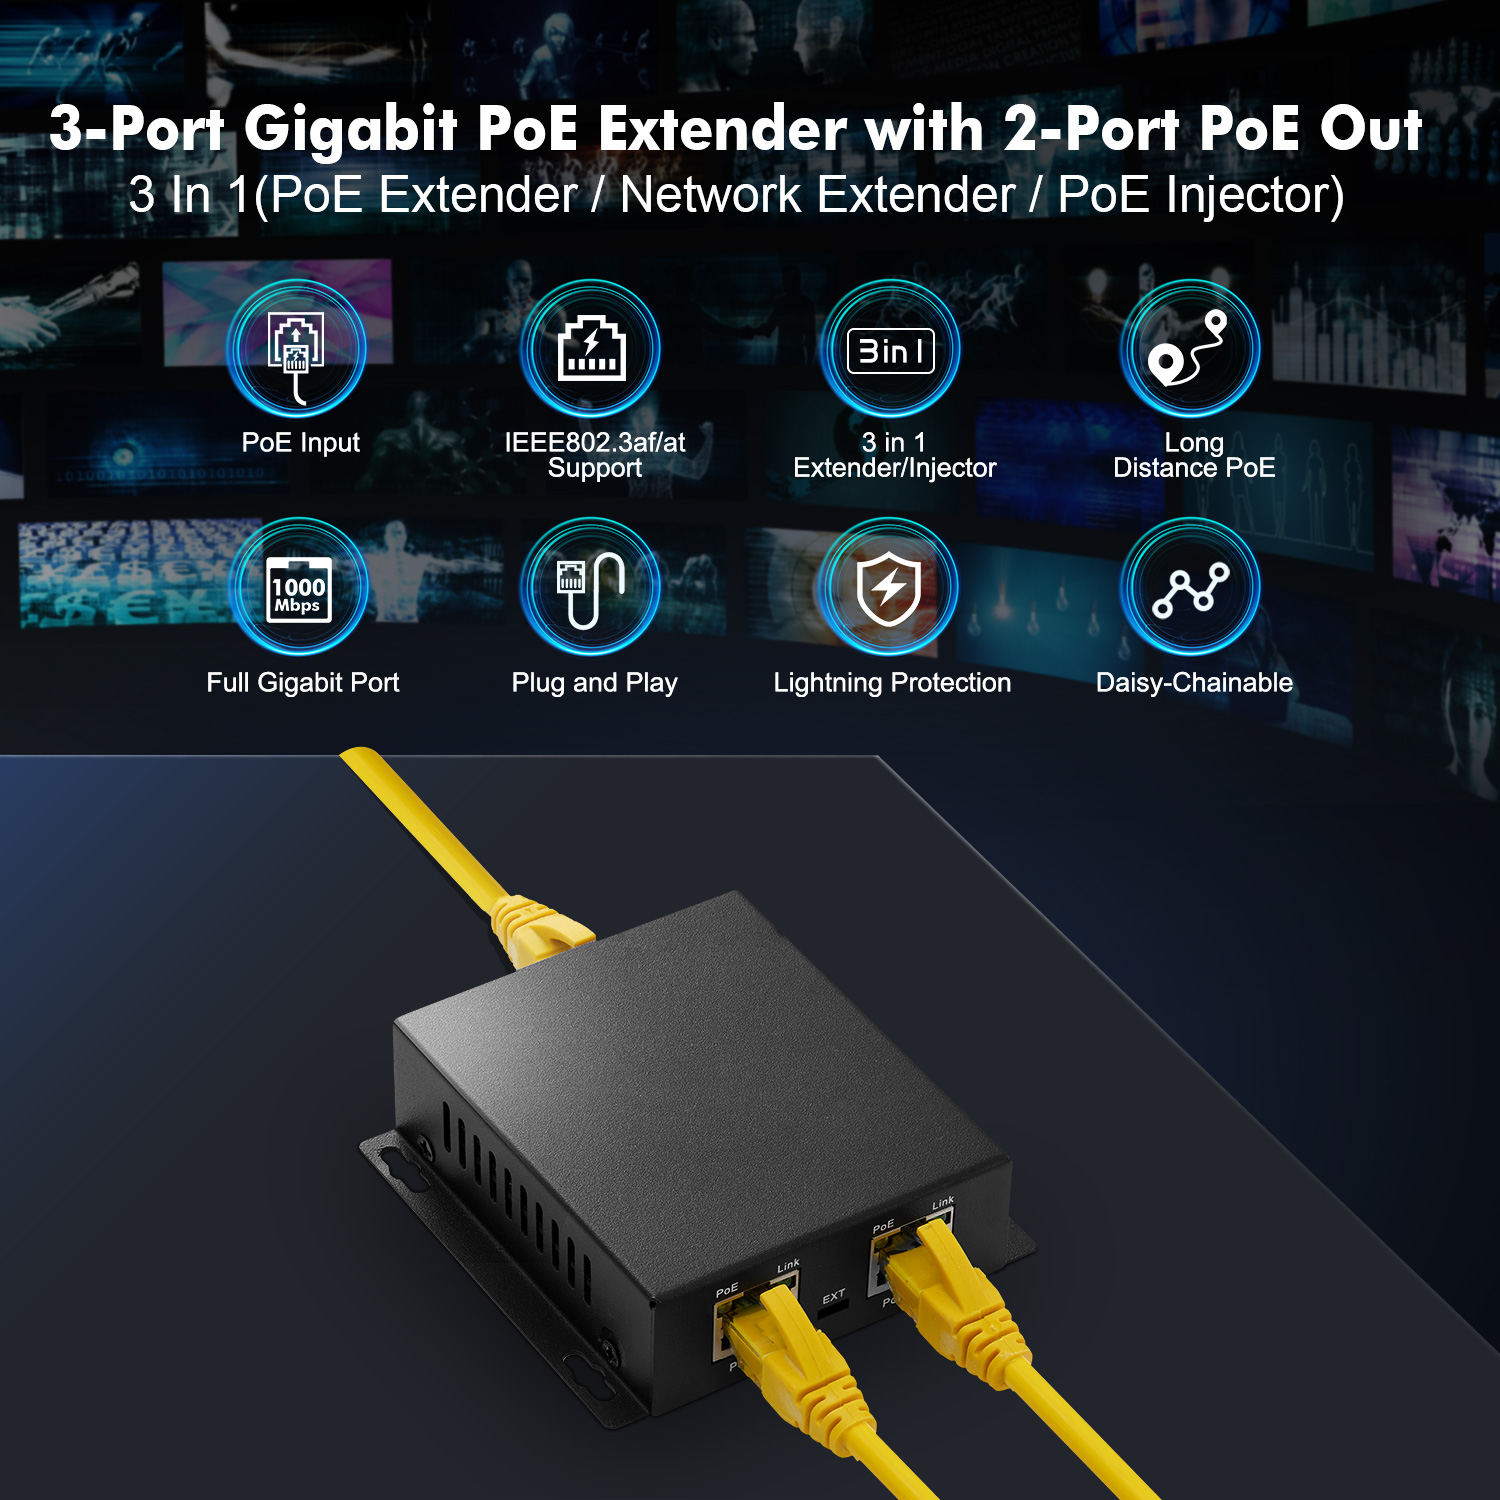 MokerLink 4 Port PoE Extender, IEEE 802.3 af/at PoE Repeater, 100Mbps, 1  PoE in 3 PoE Out, Wall & Din Rail Mount POE Passthrough Switch